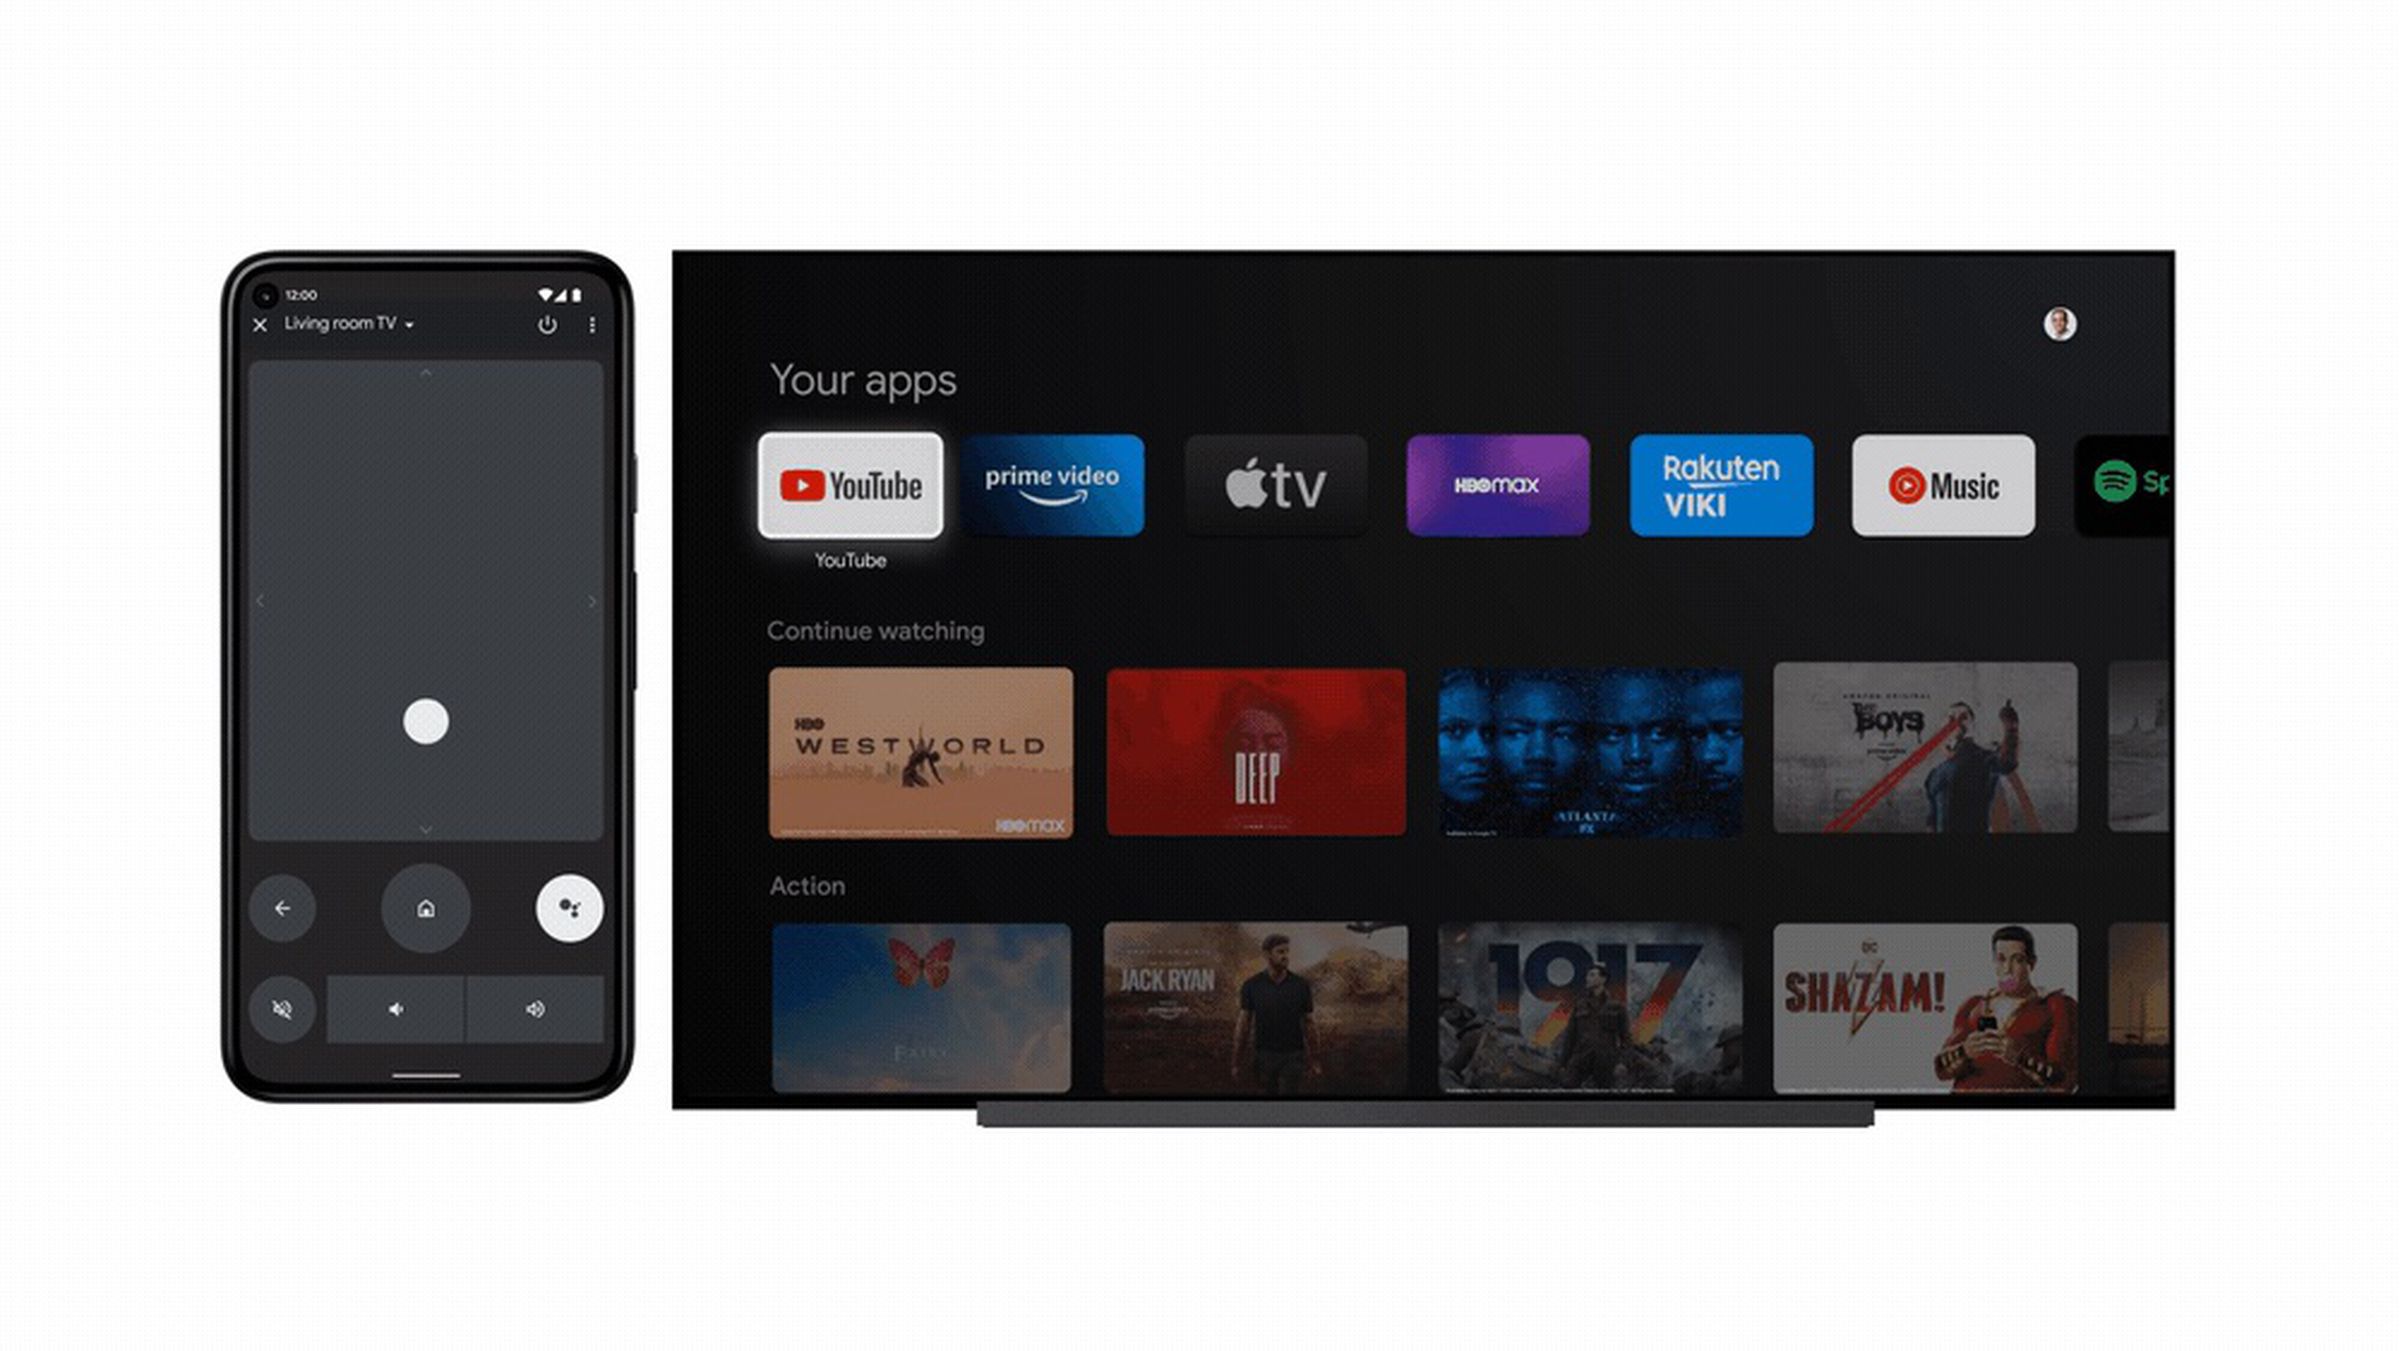 The Android TV remote in Android 12